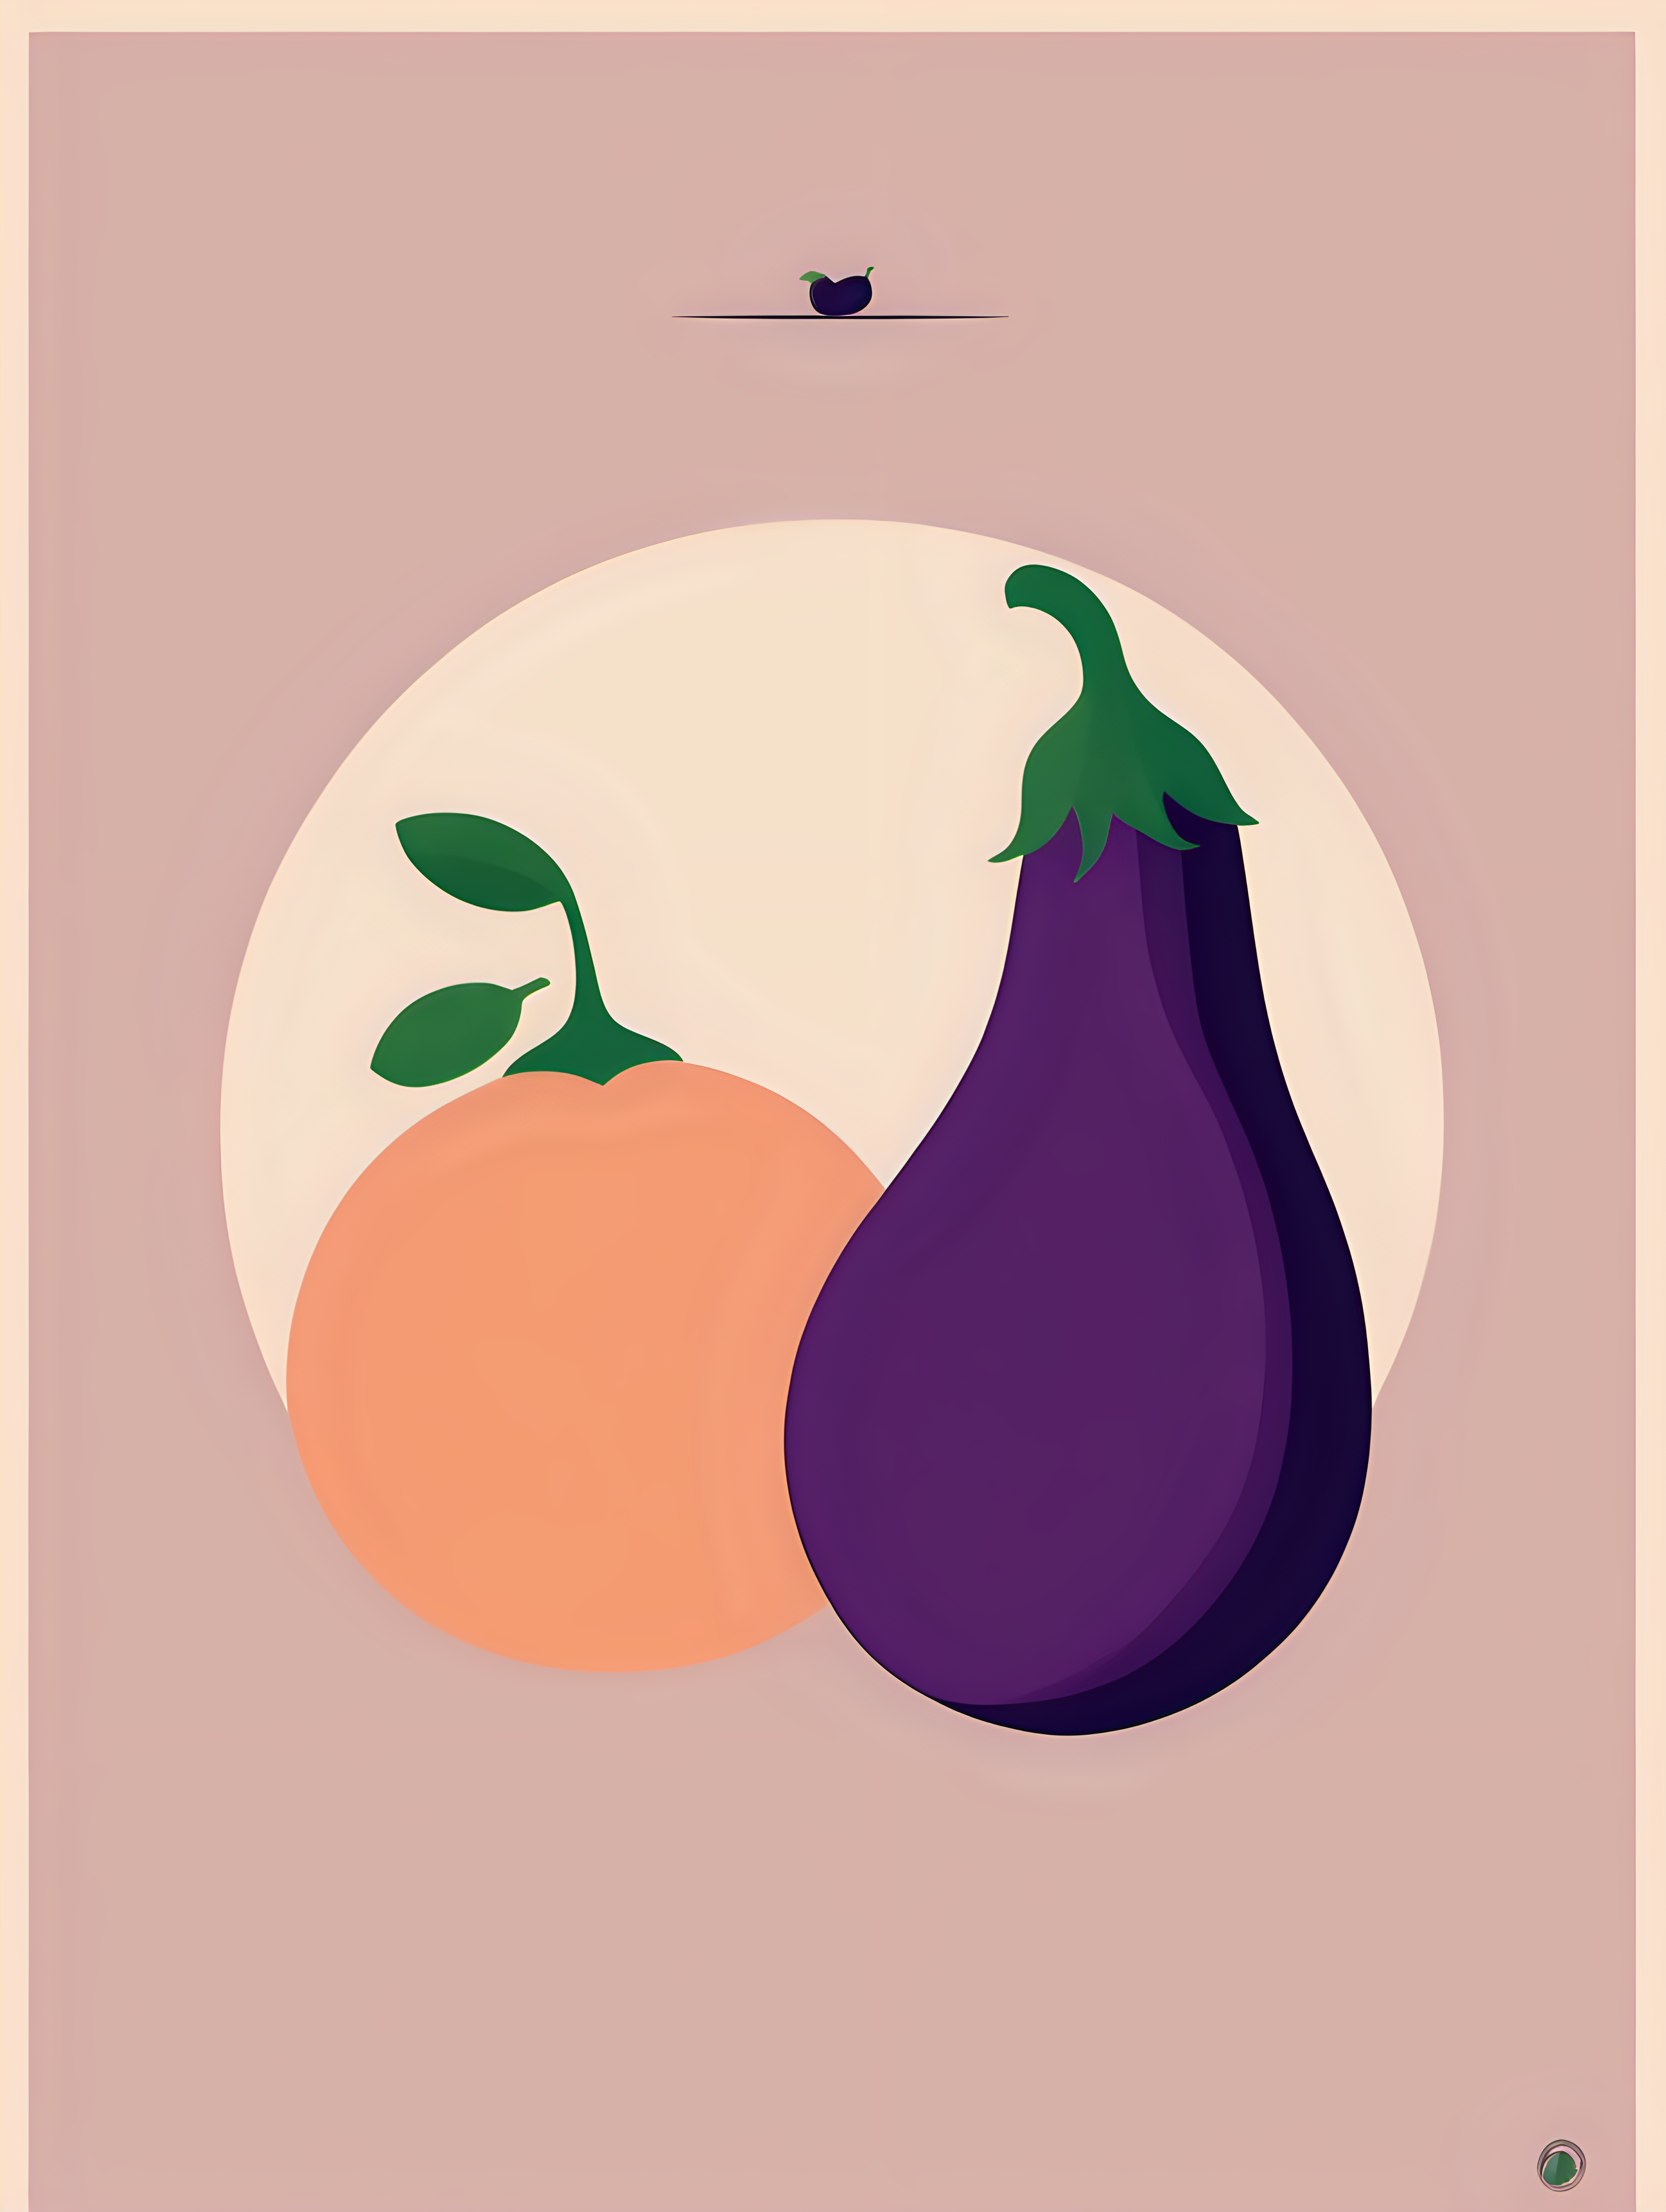 minimalist poster design featuring an eggplant and a peach 